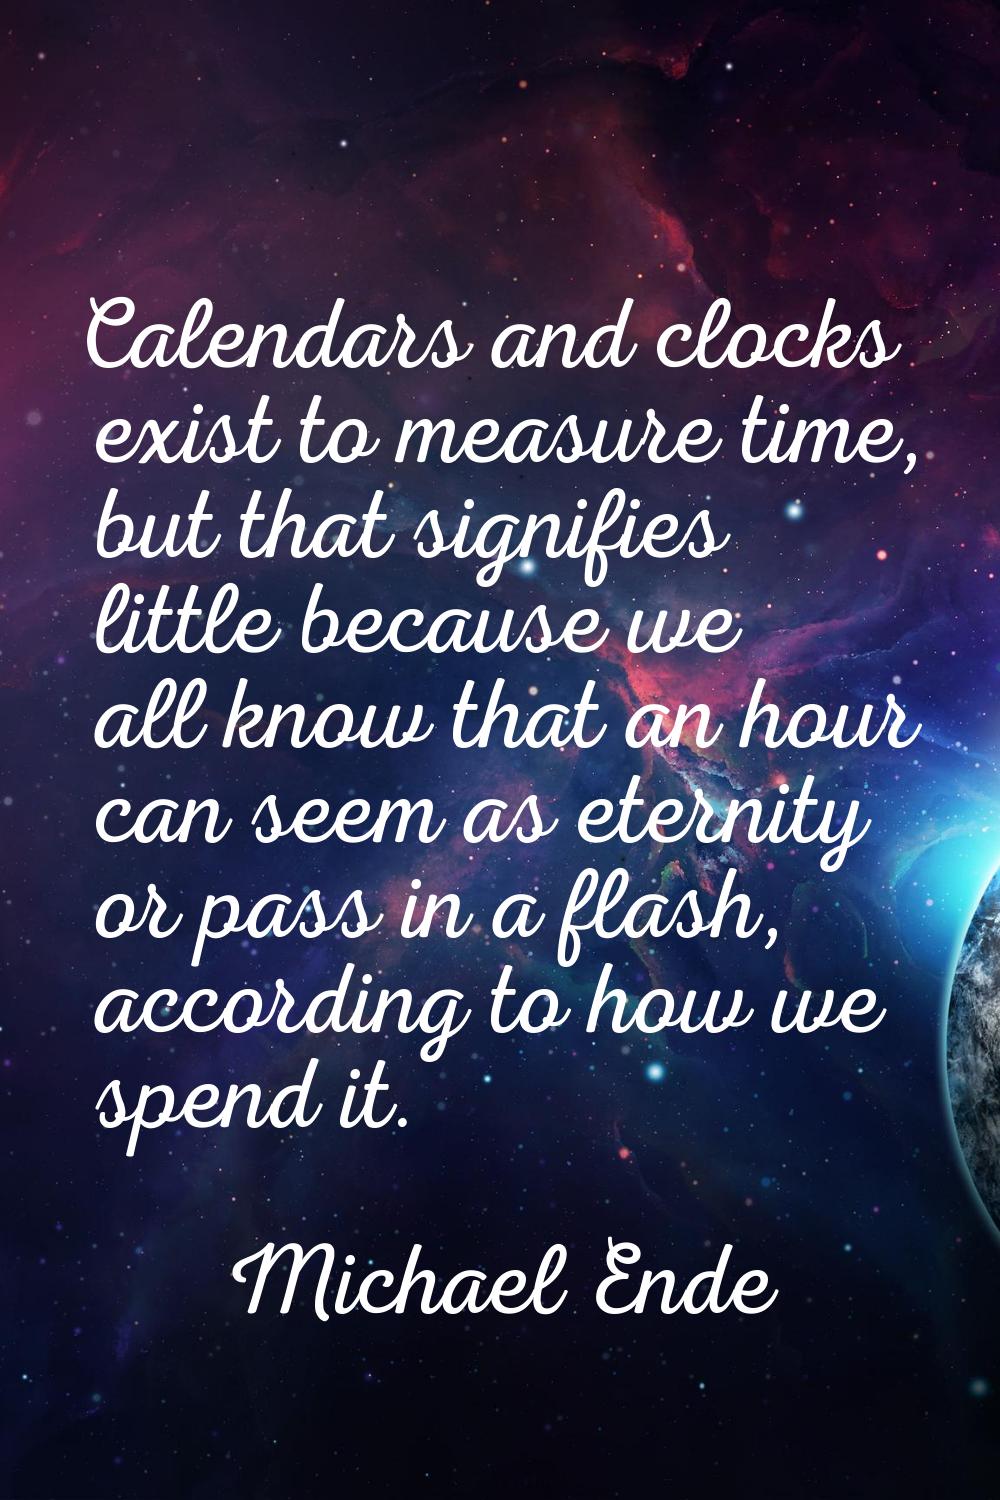 Calendars and clocks exist to measure time, but that signifies little because we all know that an h